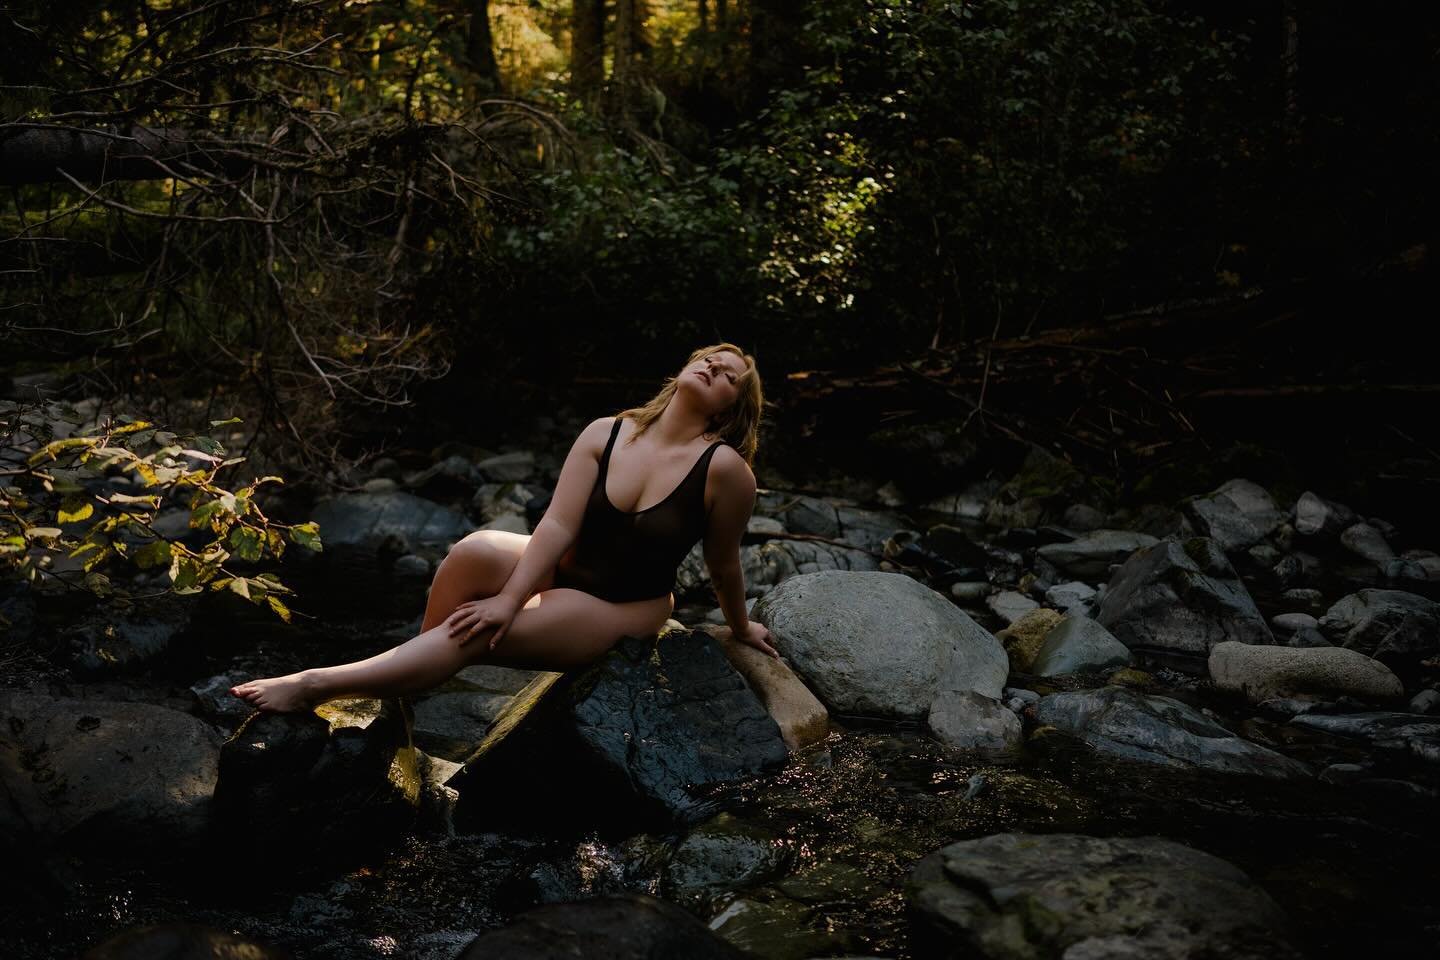 As spring is fully here I&rsquo;m so excited to embrace the outdoor sessions again ✨🌳💦

I love how both of these poses feel like an offering or a surrendering ourselves up to Mother Earth 🌎

Which do you prefer 1 or 2?